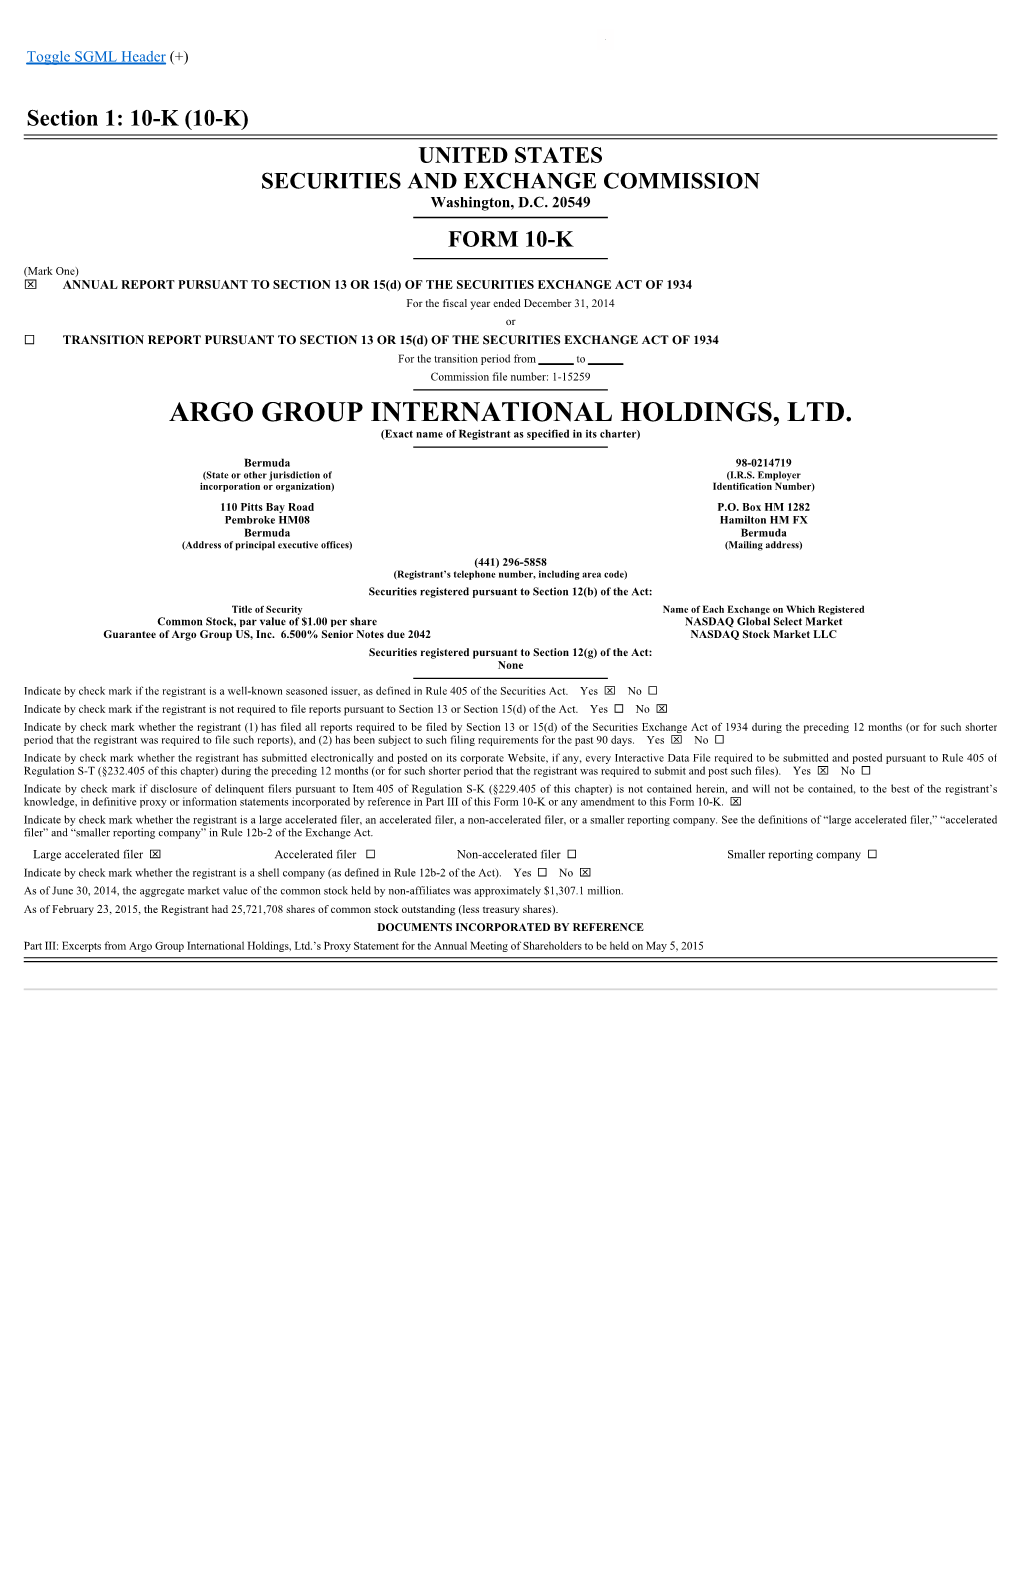 ARGO GROUP INTERNATIONAL HOLDINGS, LTD. (Exact Name of Registrant As Specified in Its Charter)